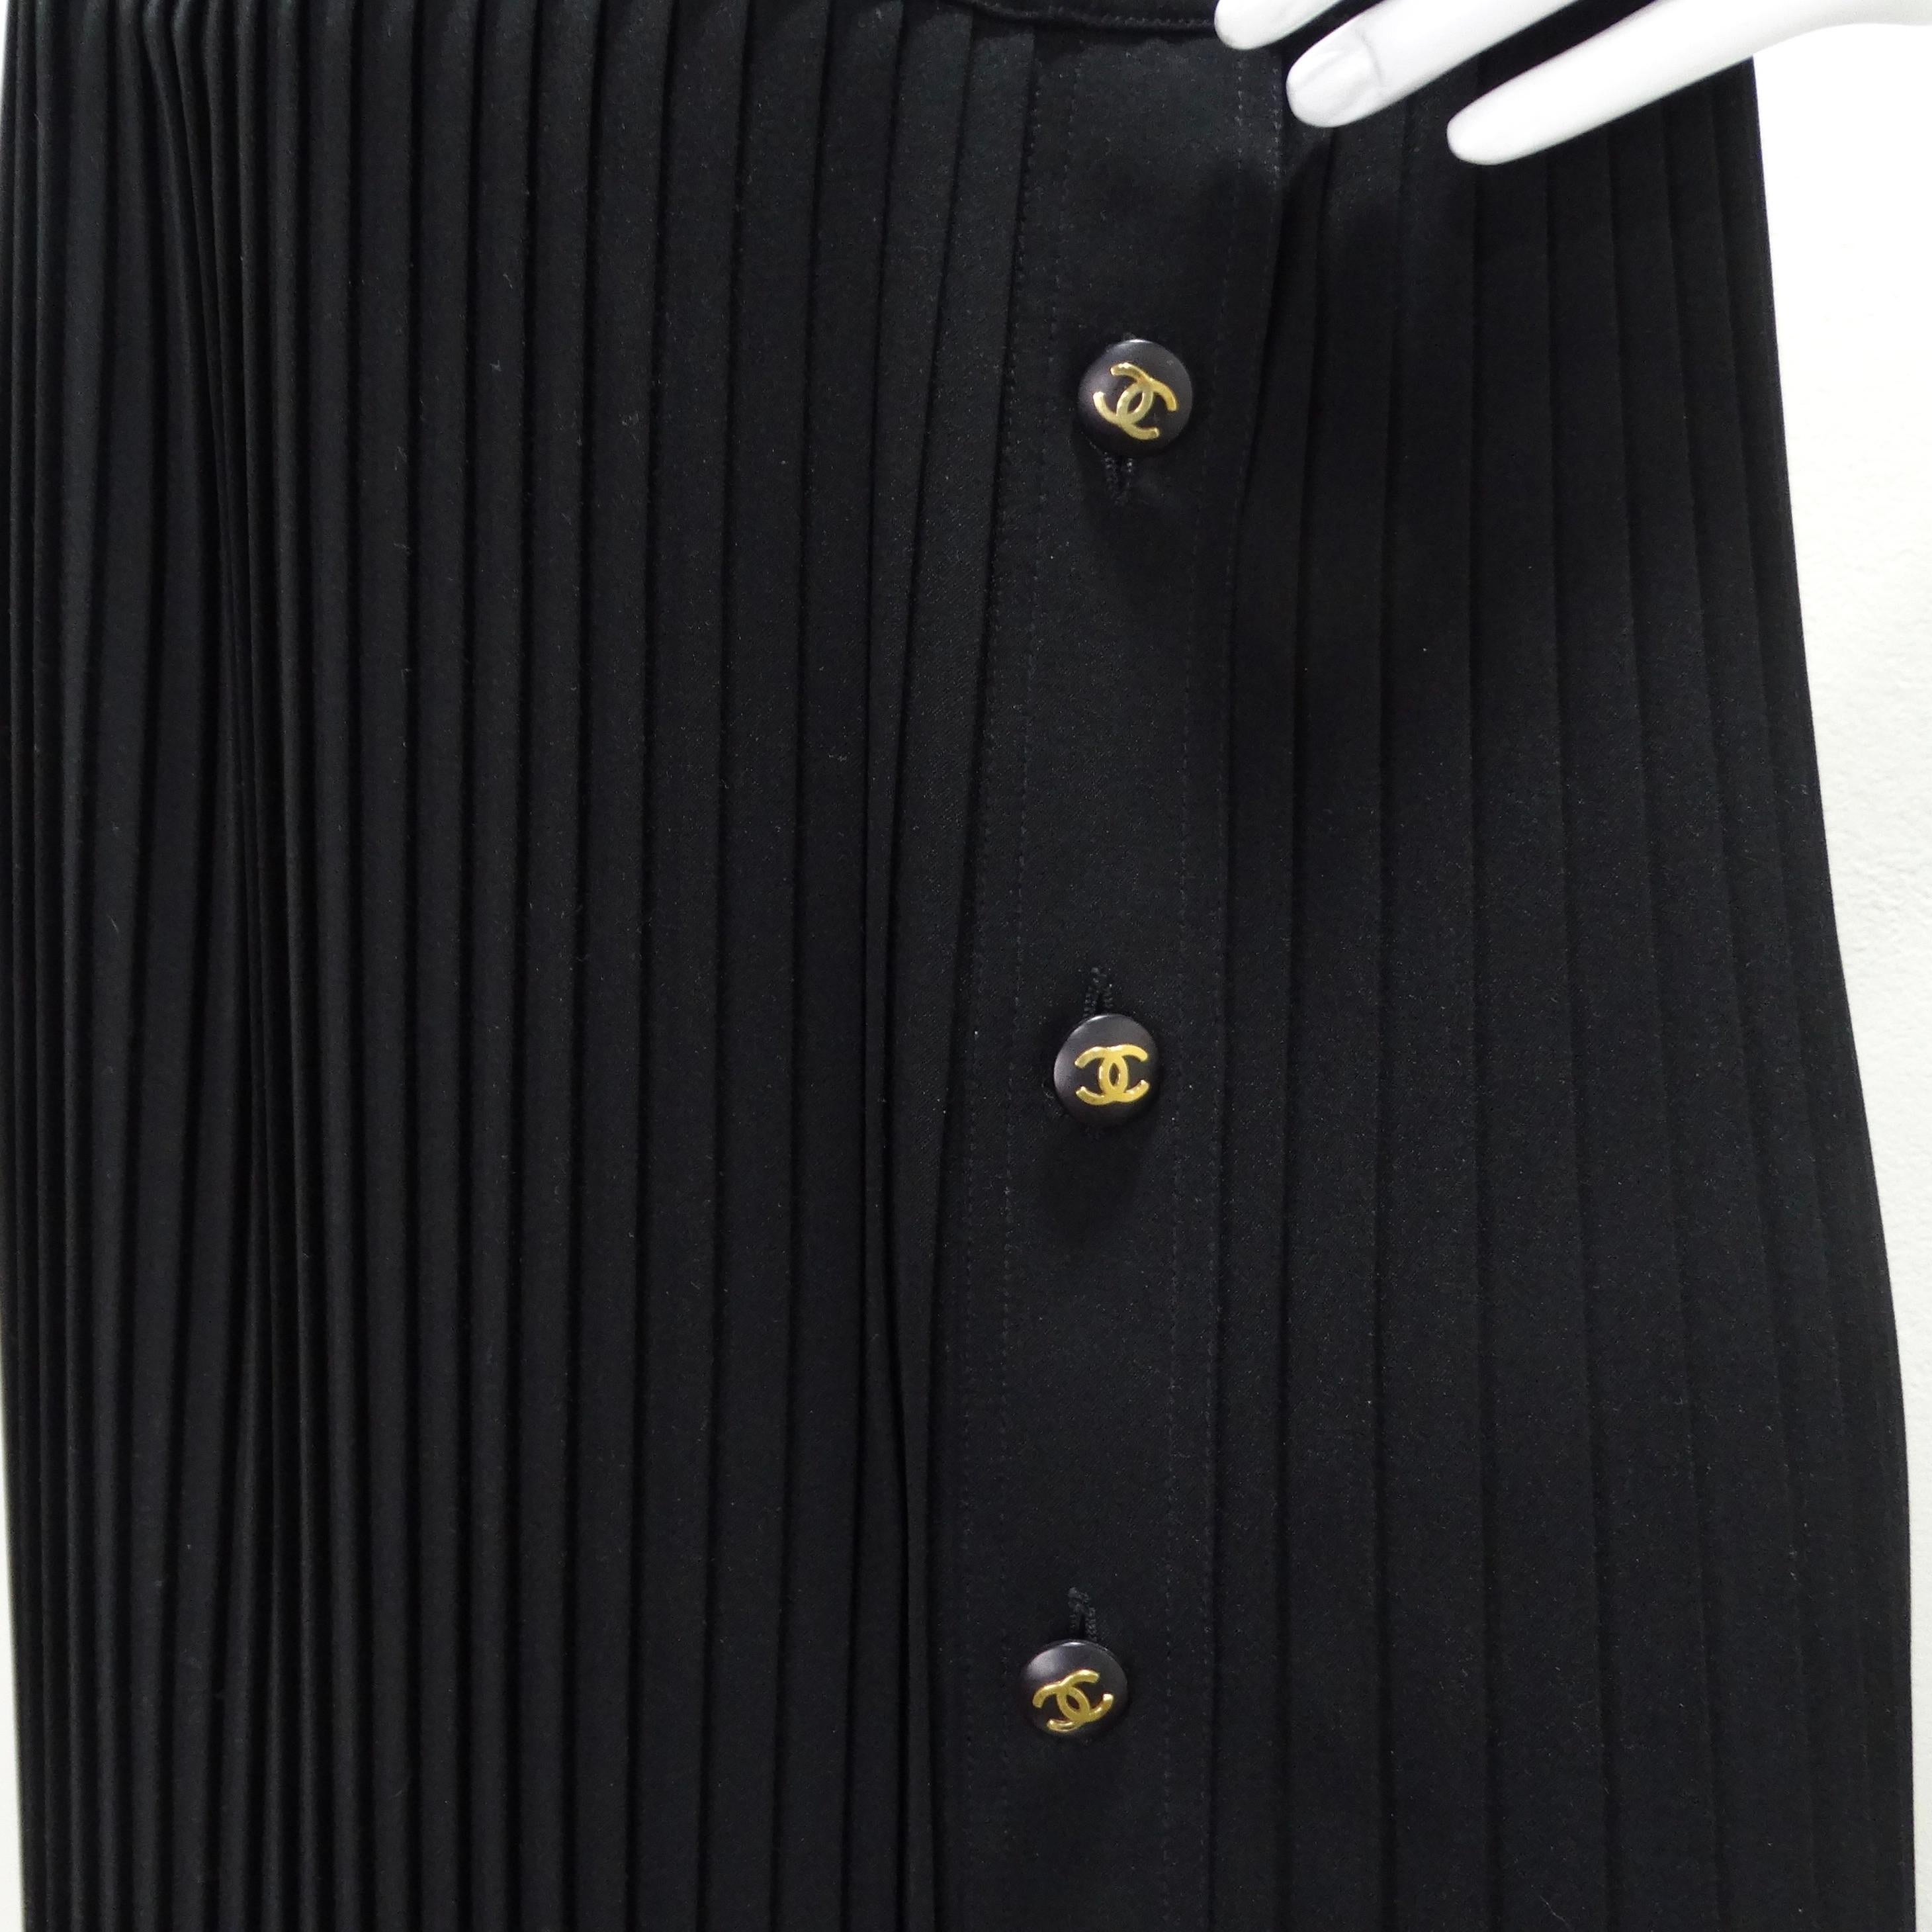 Chanel 90s Black Pleated Midi Skirt In Excellent Condition For Sale In Scottsdale, AZ